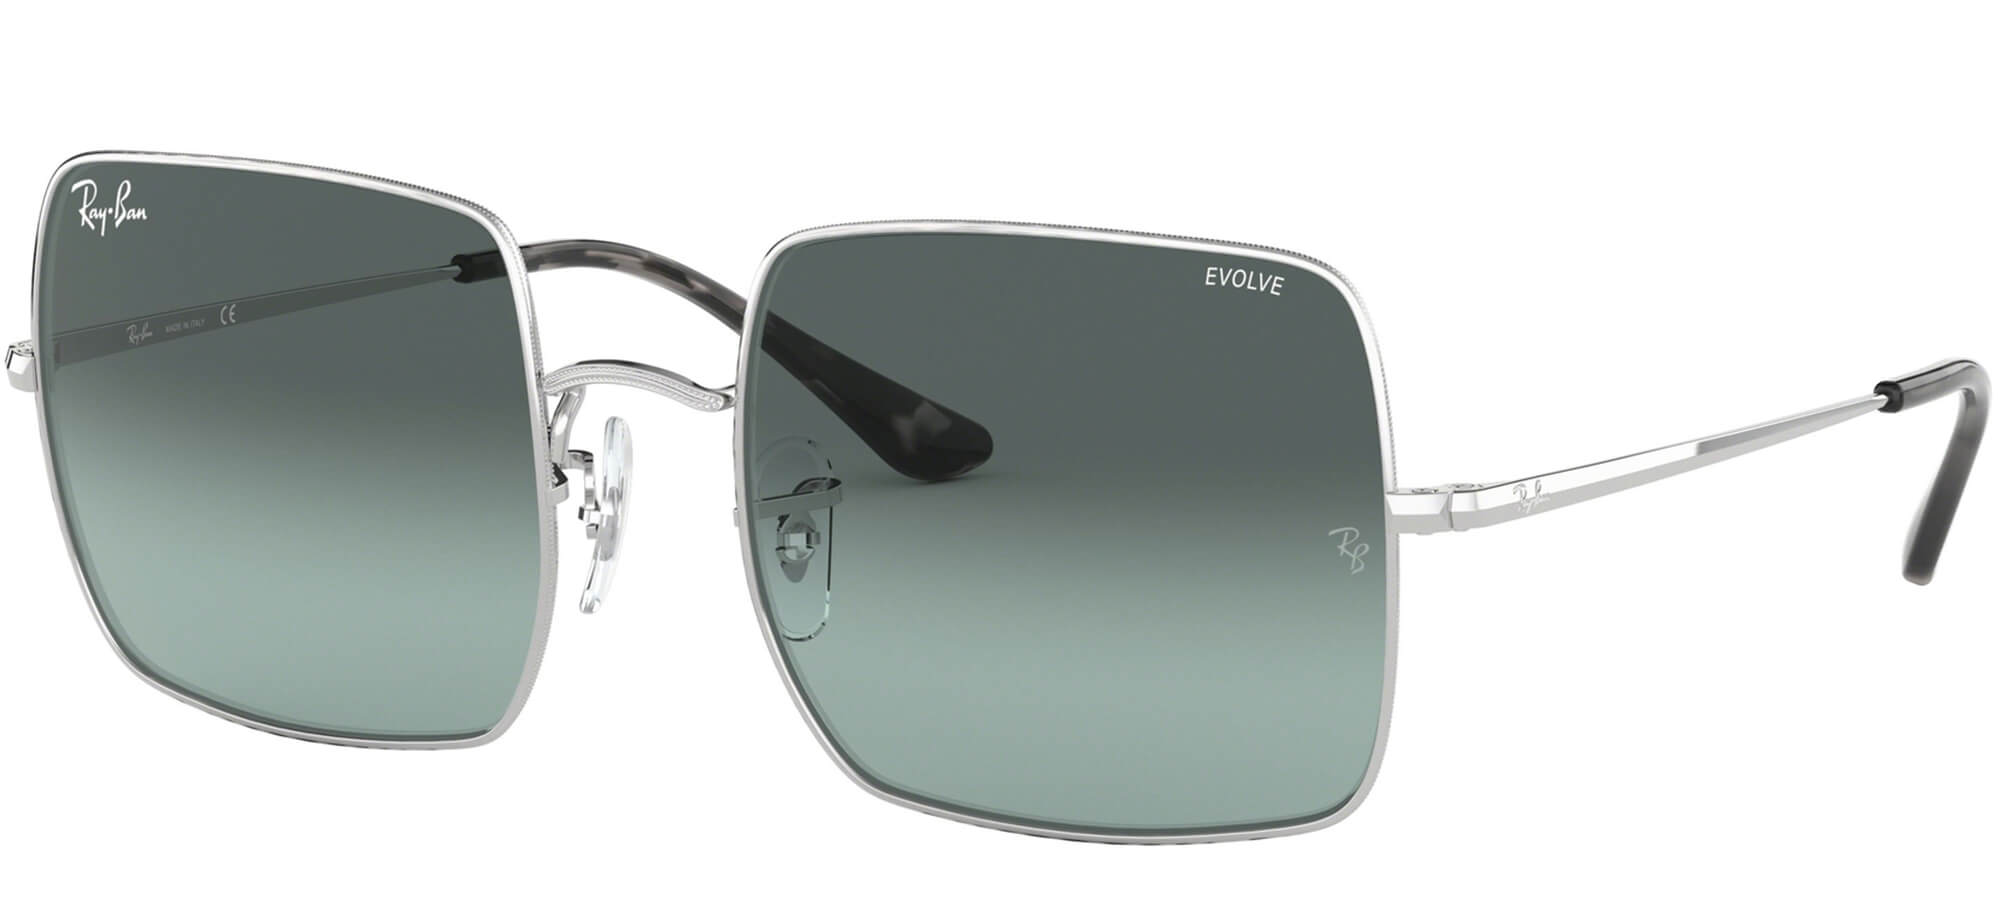 Ray-BanSQUARE RB 1971 EVOLVE LENSESSilver/grey Blue Shaded (9149/AD)